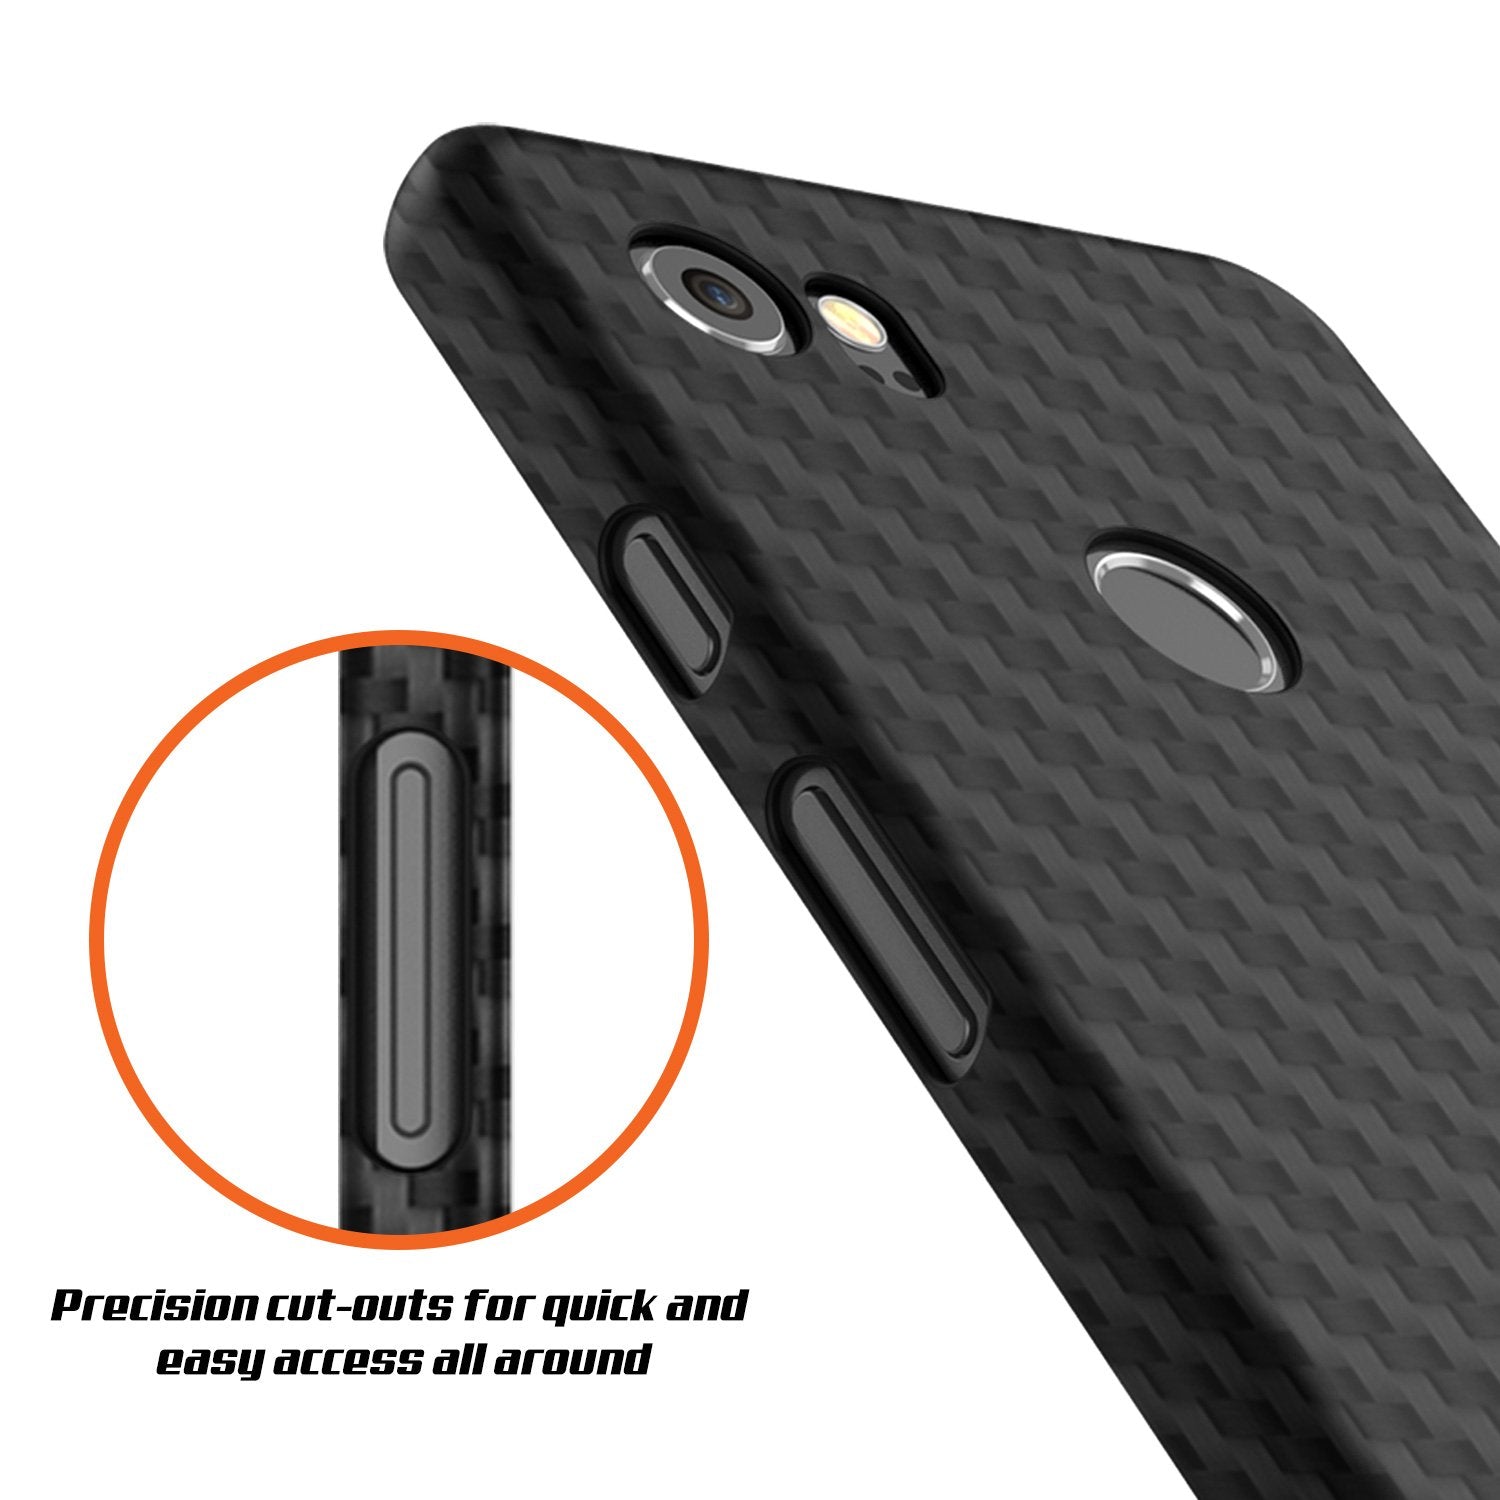 Google Pixel 2 XL  CarbonShield Heavy Duty & Ultra Thin 2 Piece Dual Layer PU Leather Cover [shockproof][non slip] with Tempered Glass Screen Protector for Google Pixel 2 XL [Jet Black] - PunkCase NZ